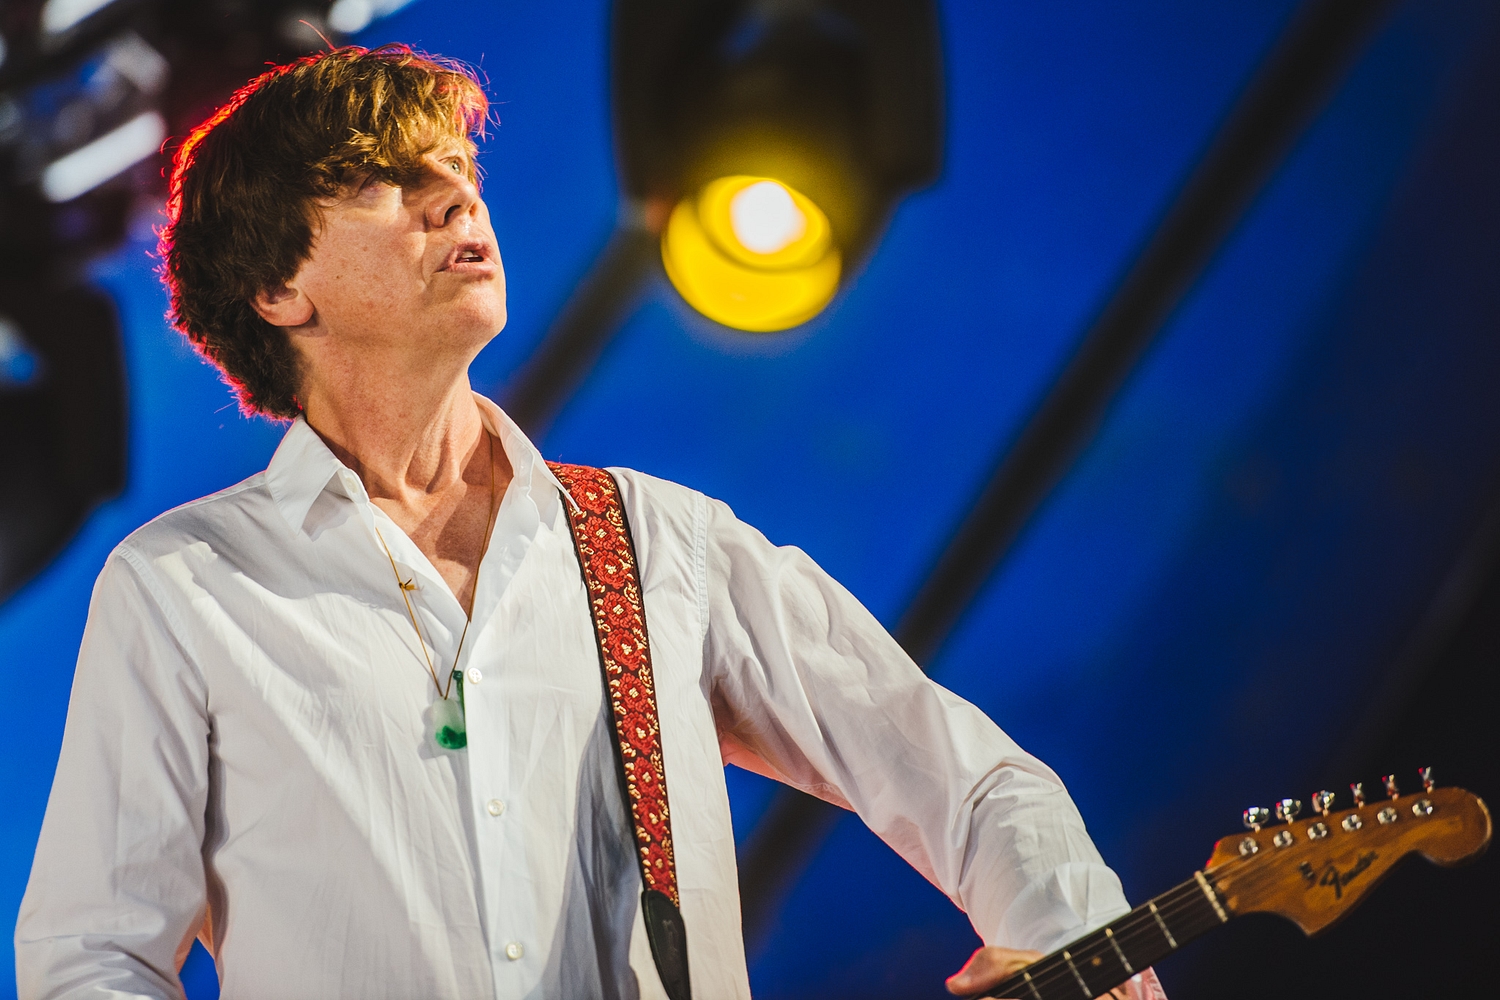 Thurston Moore brings sonic soundwaves to life at Latitude 2015